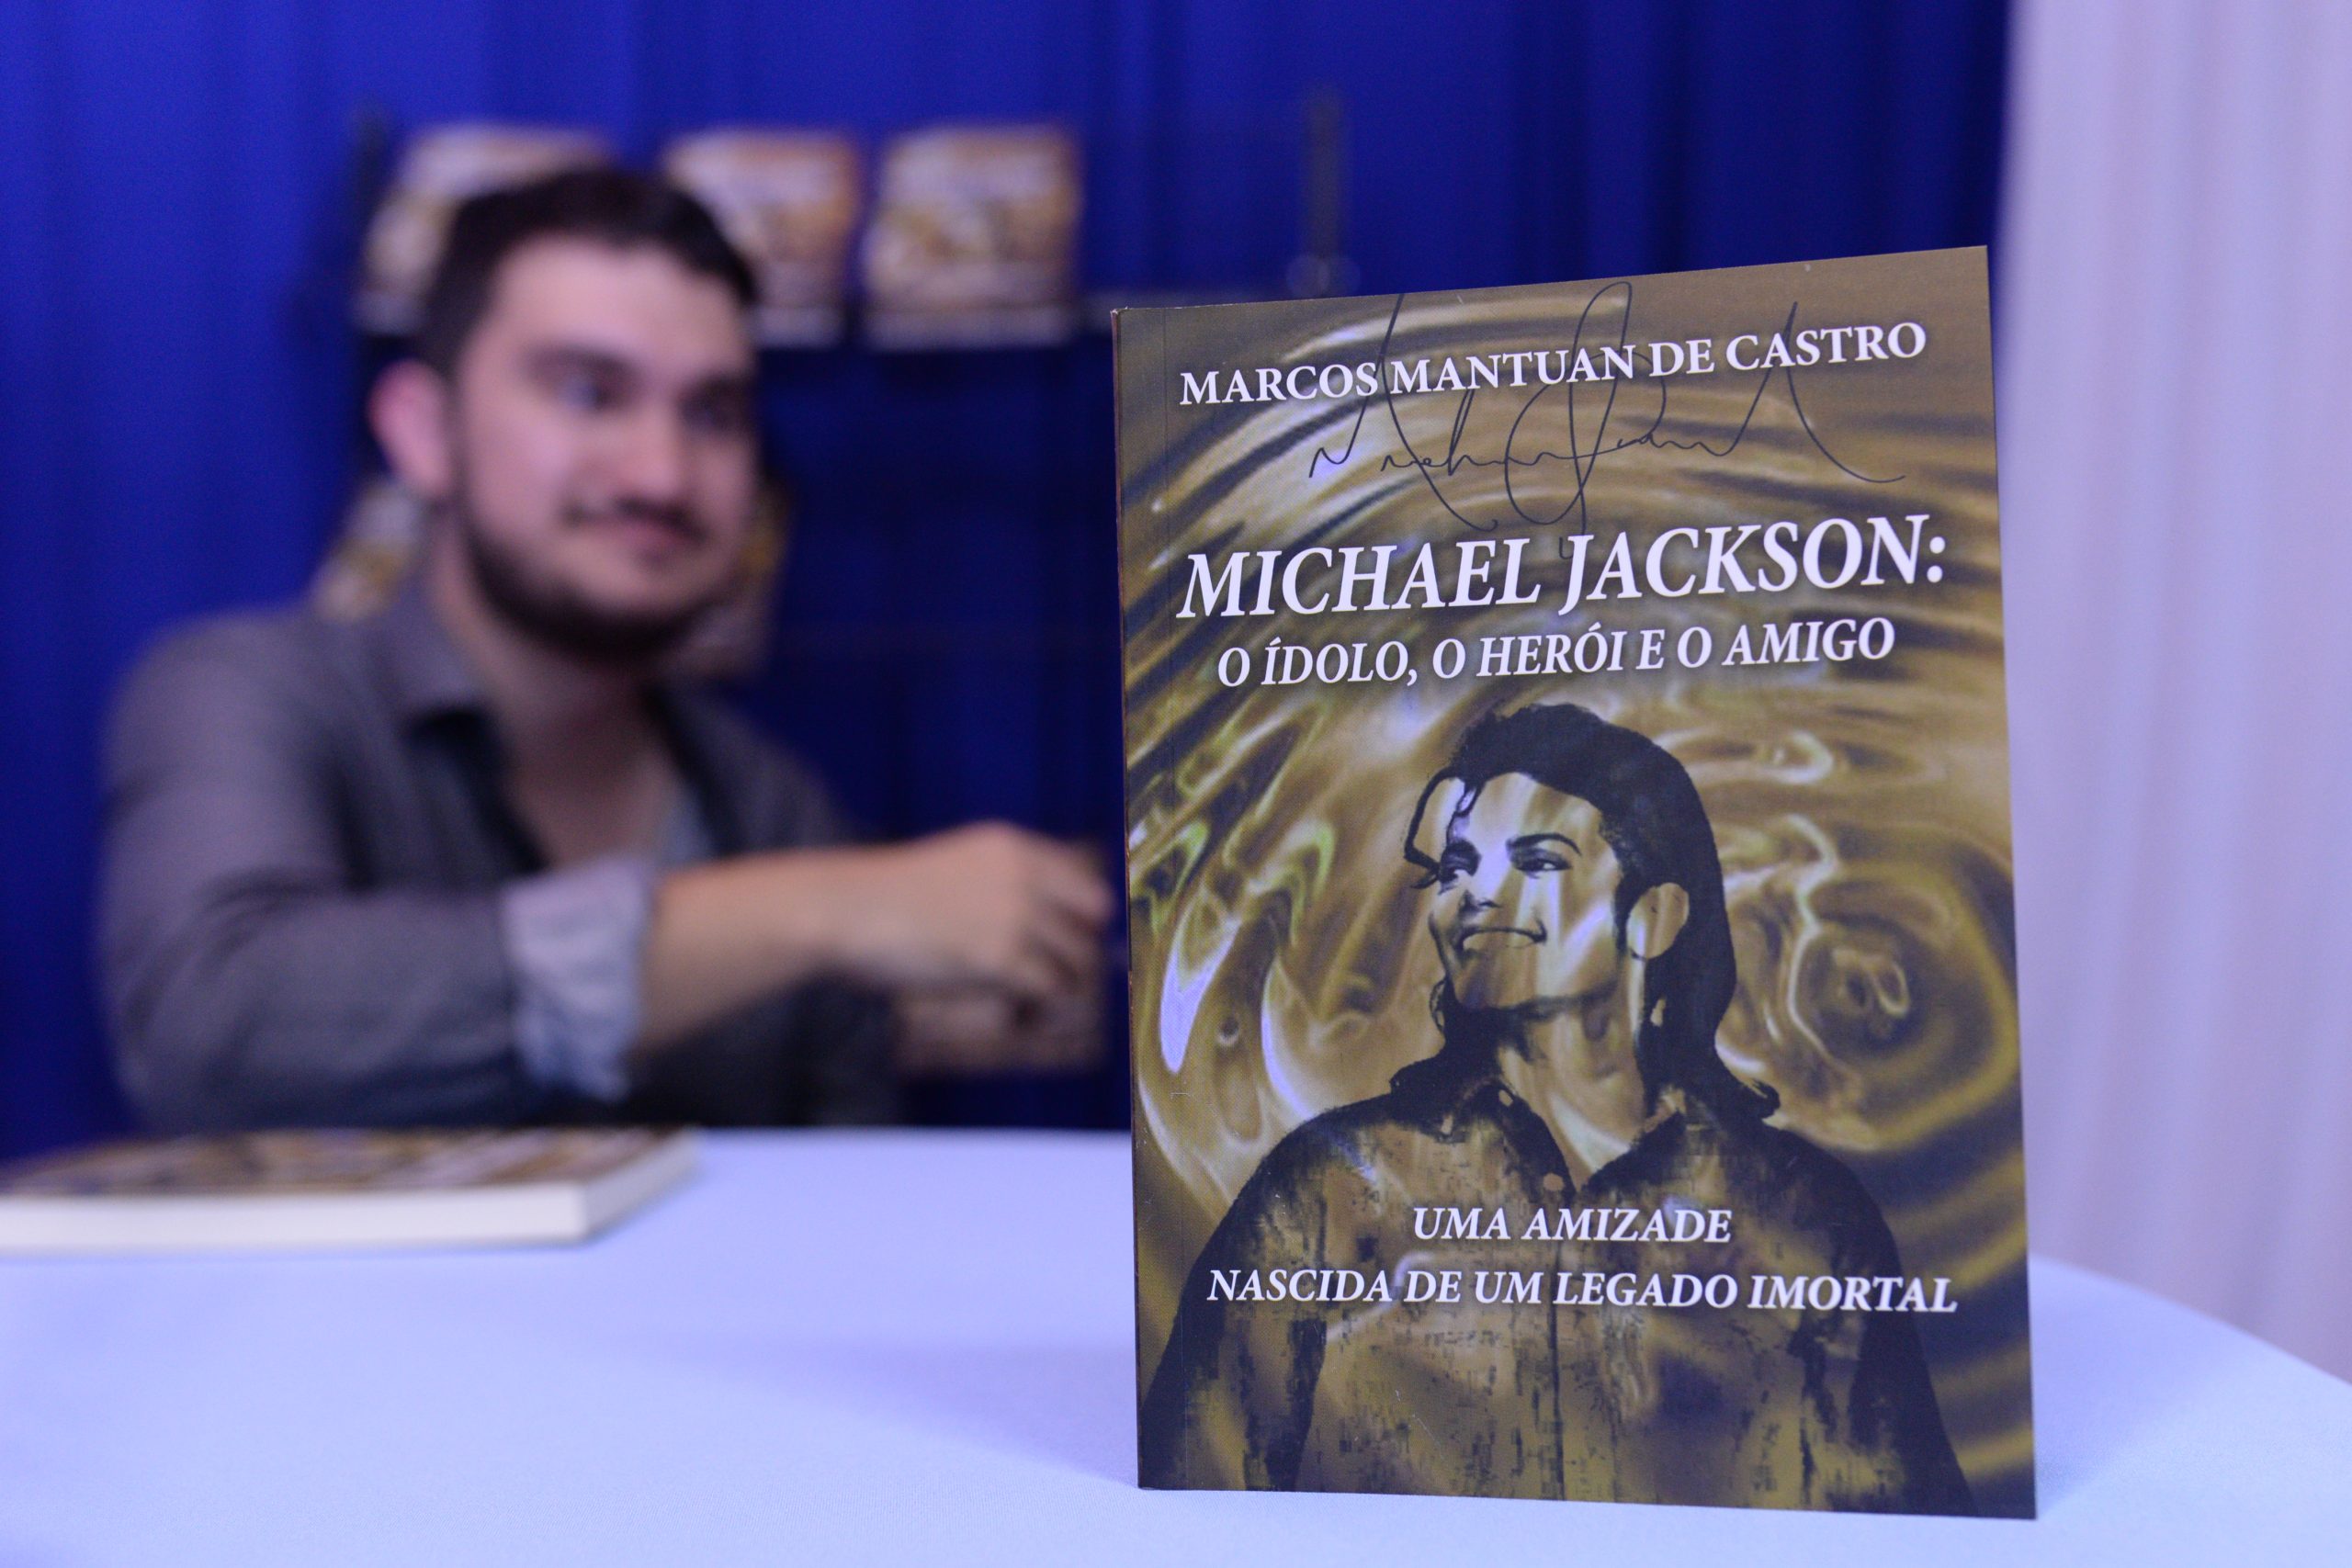 Michael Jackson: The Idol, the  hero and the Friend – My tribute book to Michael